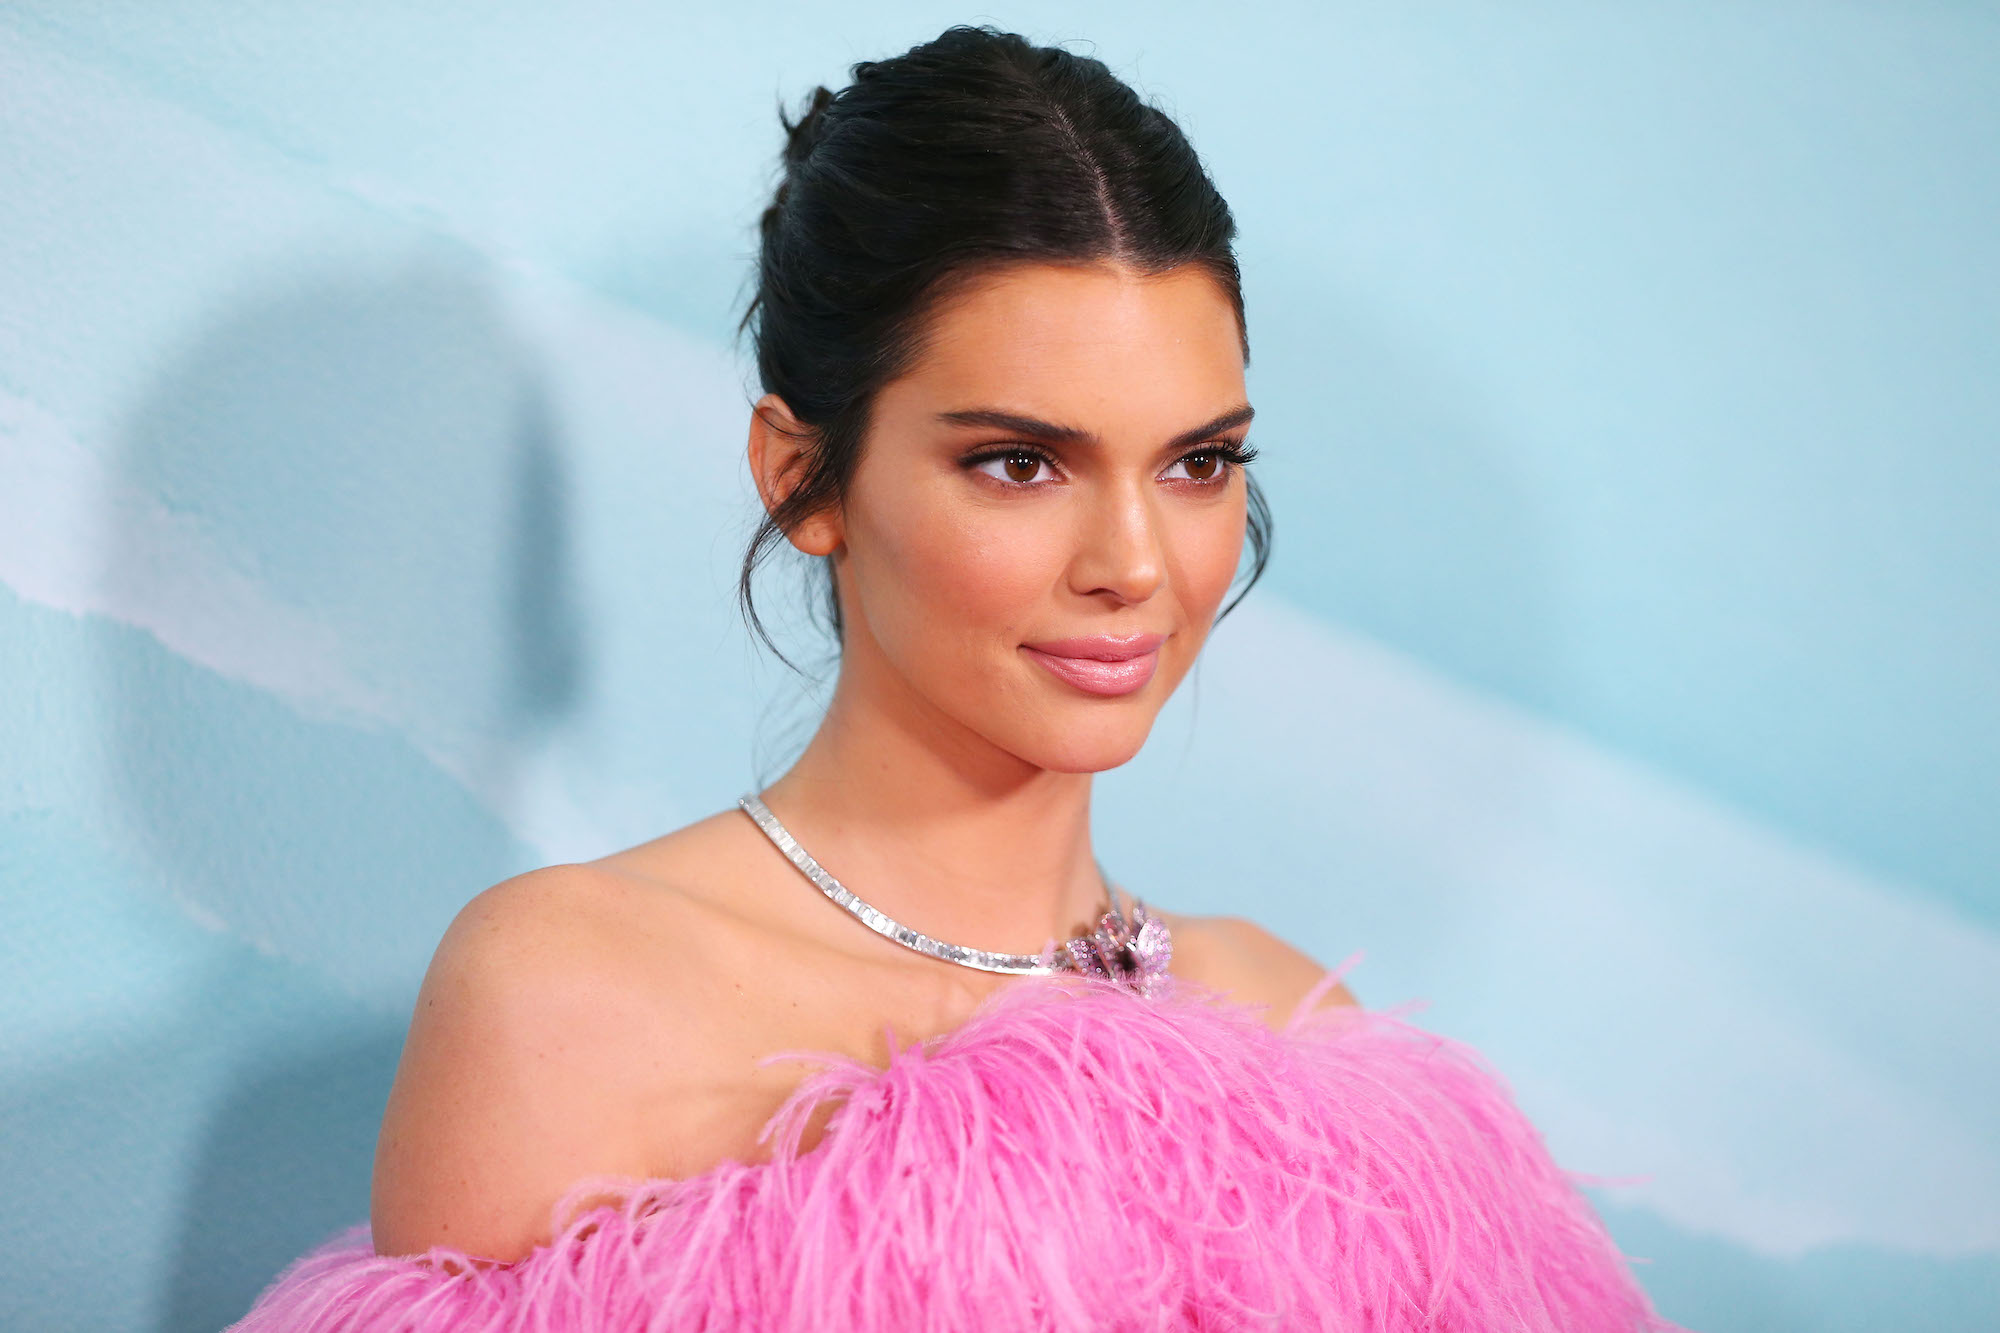 Kendall Jenner smiling in front of a blue background